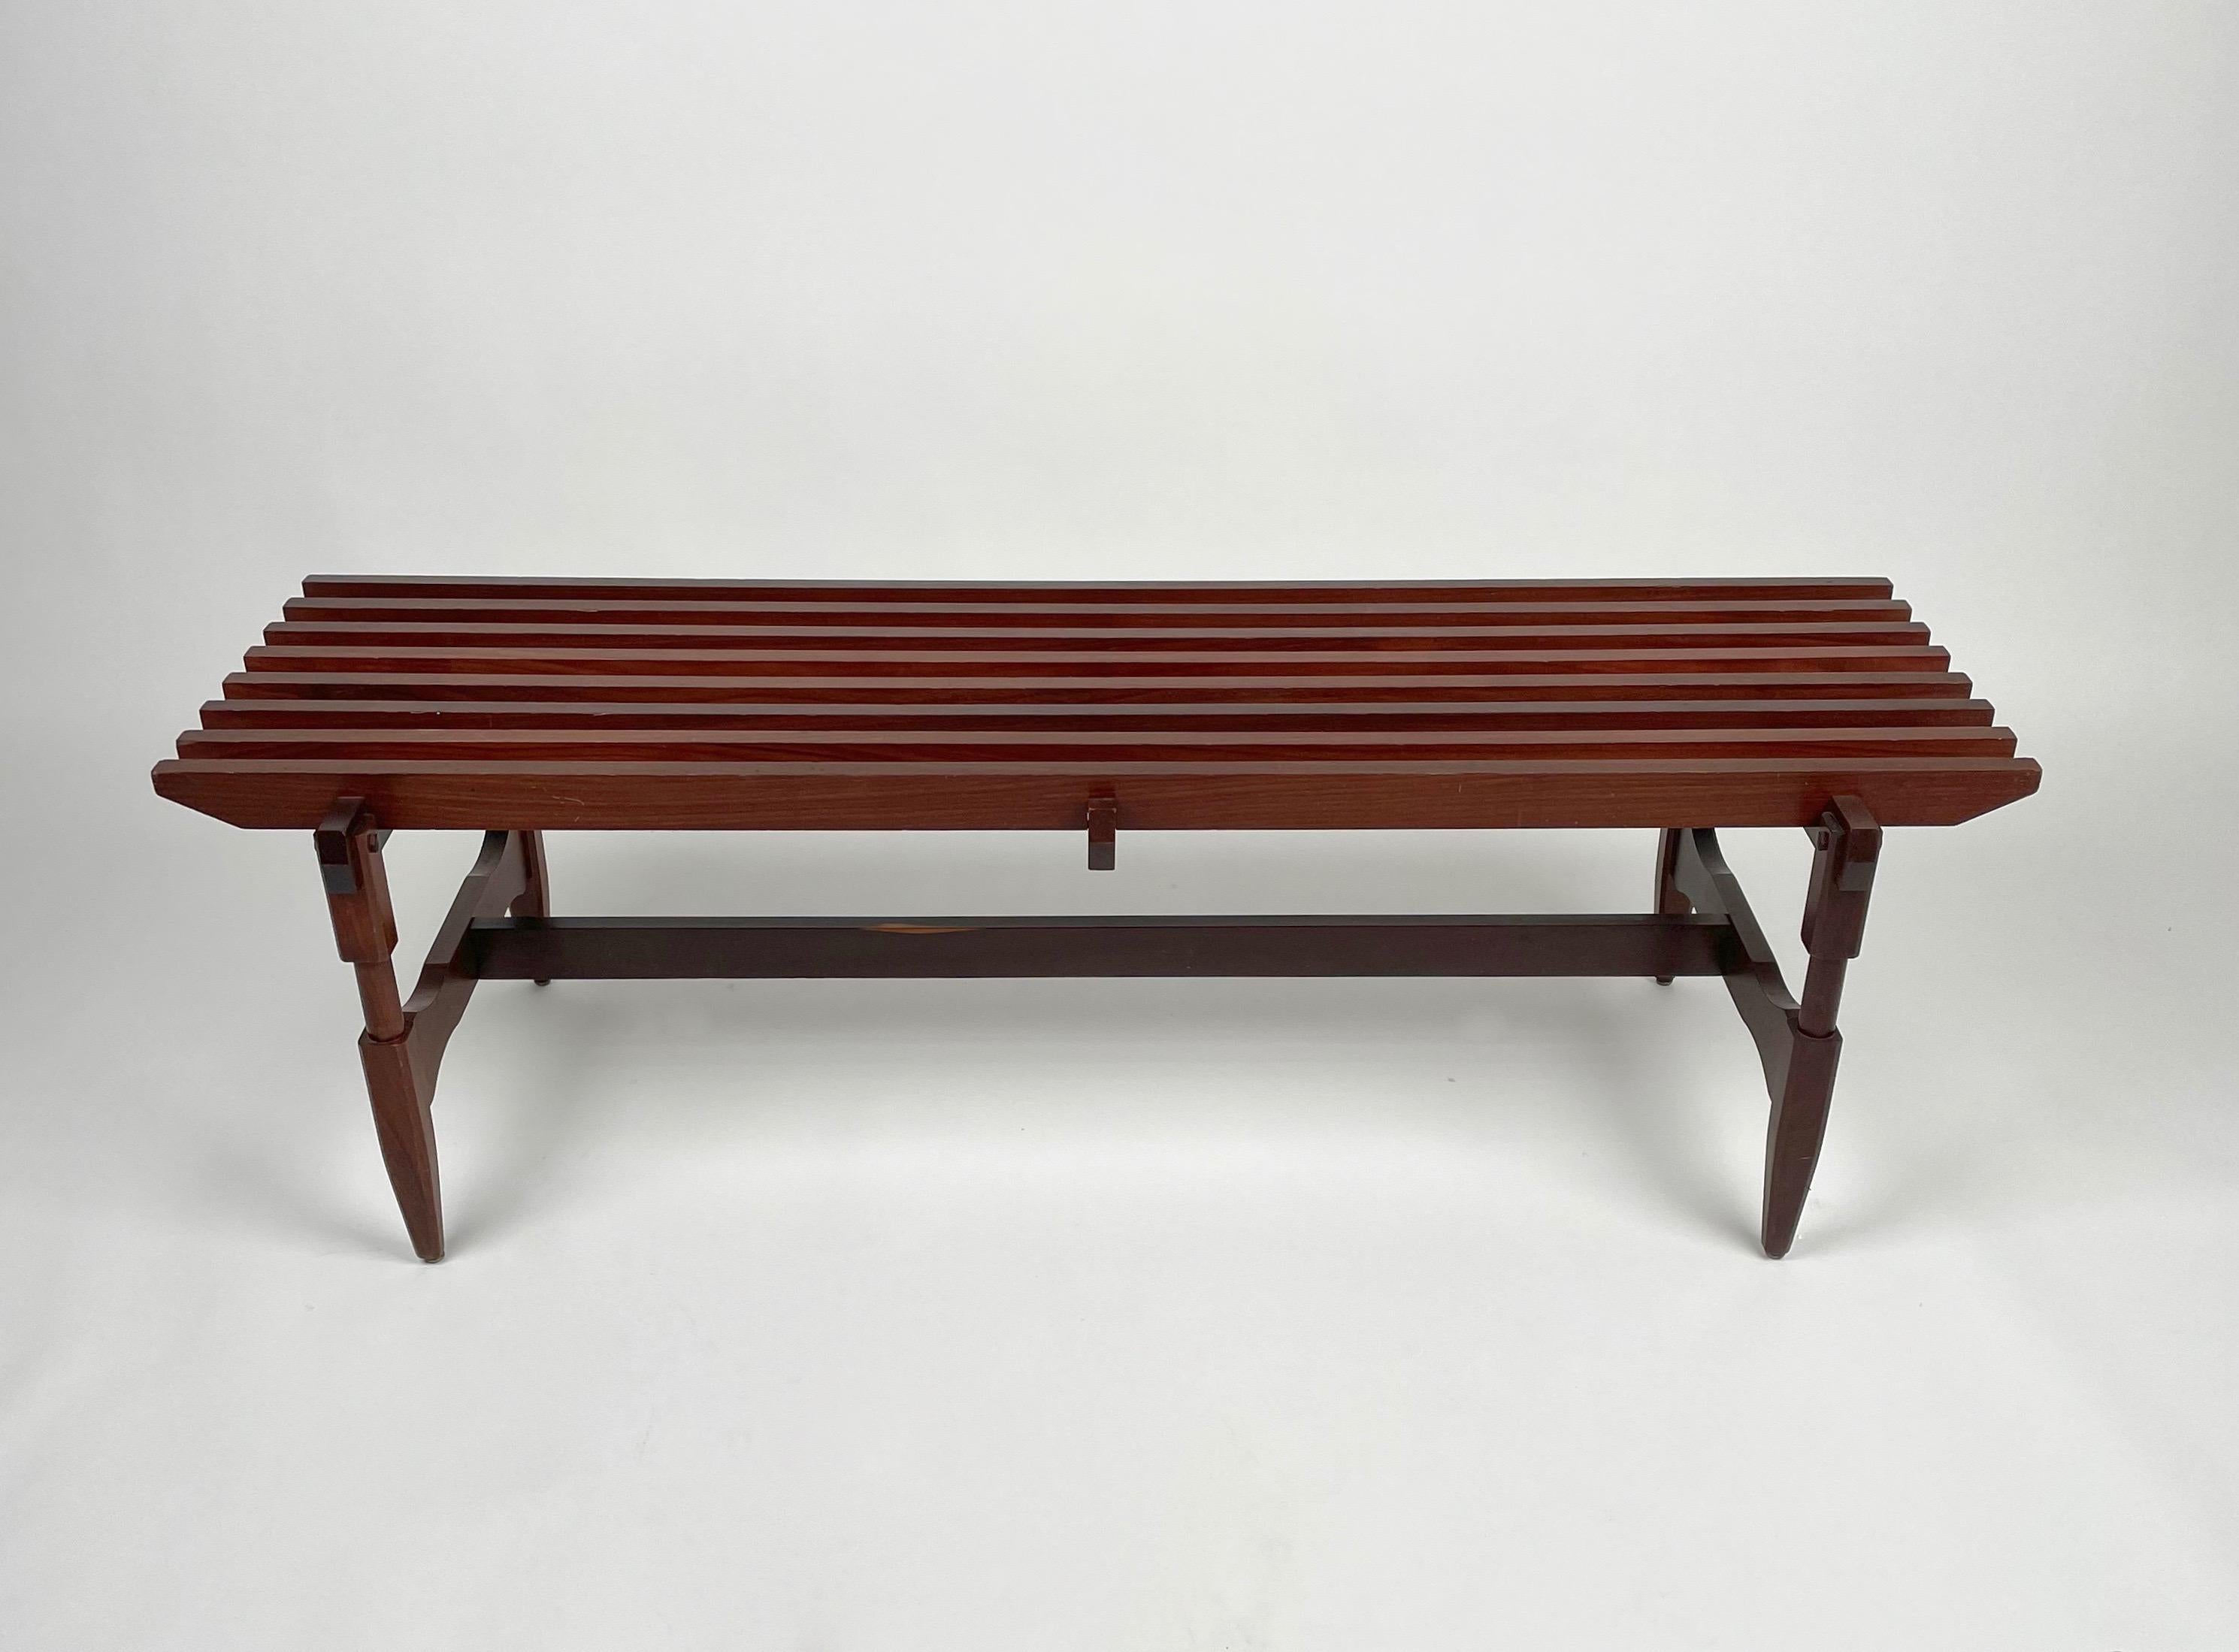 Rectangular wood bench attributed to the Italian designer Ico Parisi made in Italy in the 1950s.